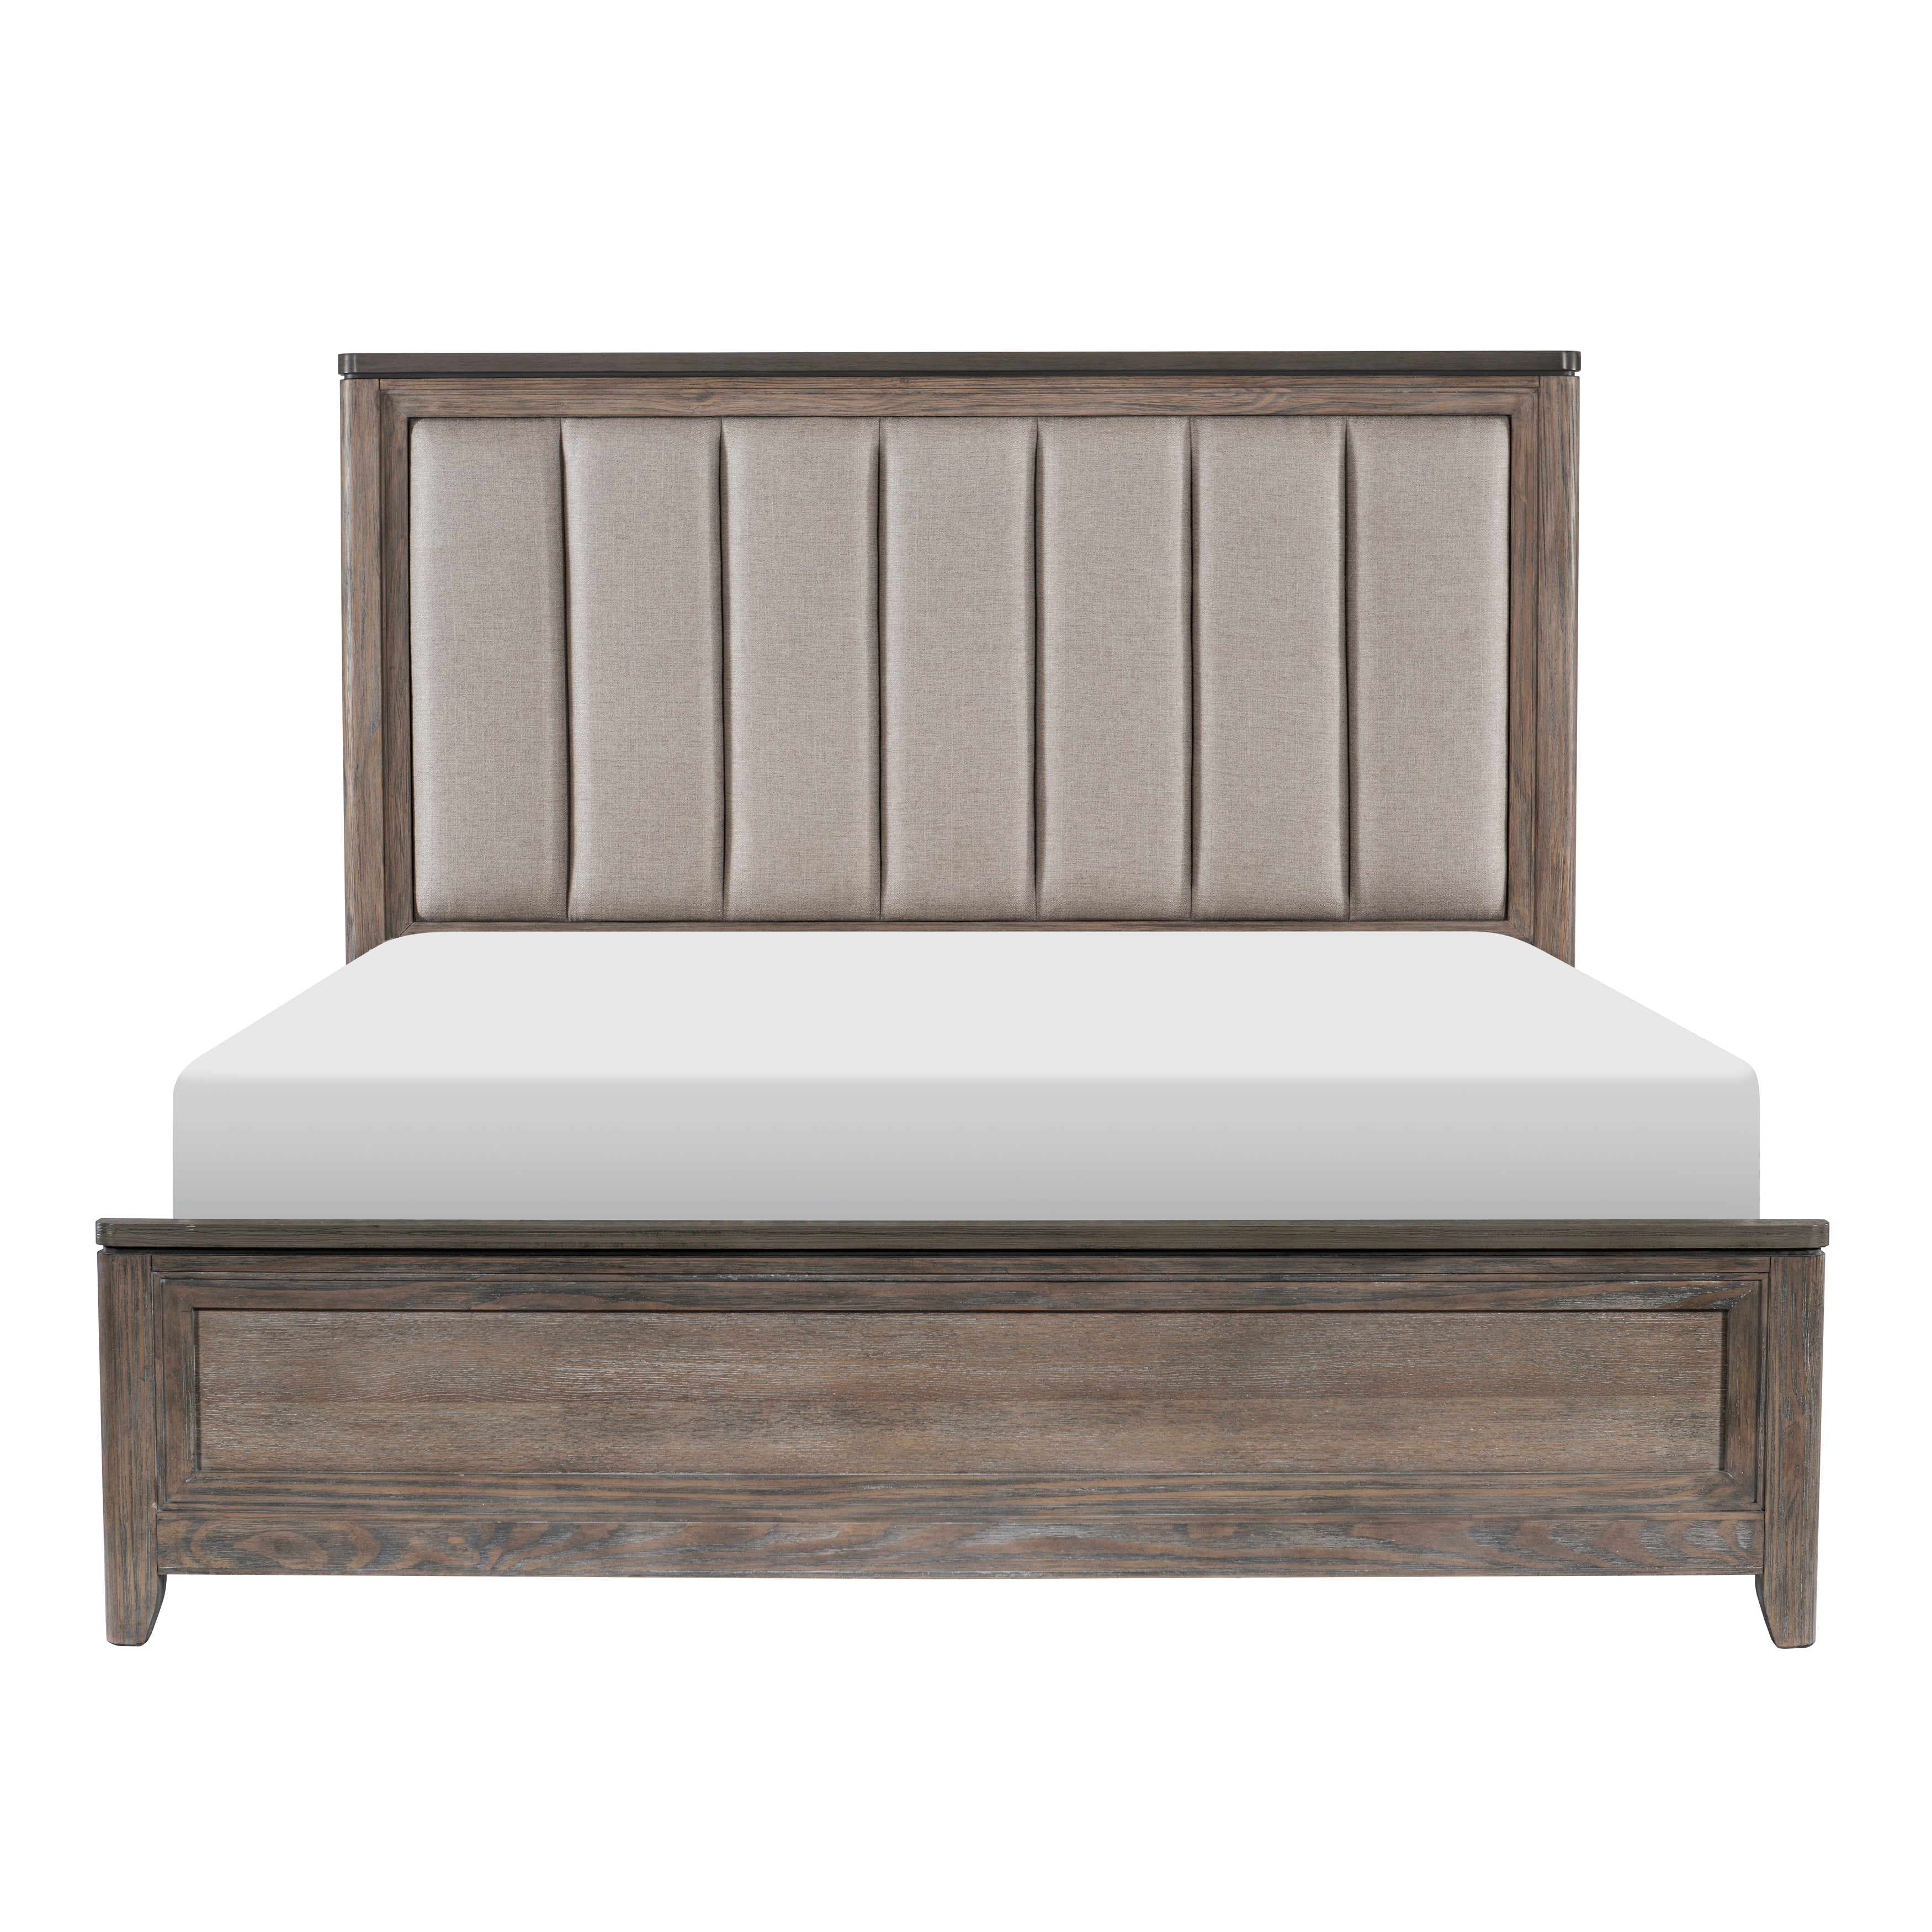 Newell Bed Frame